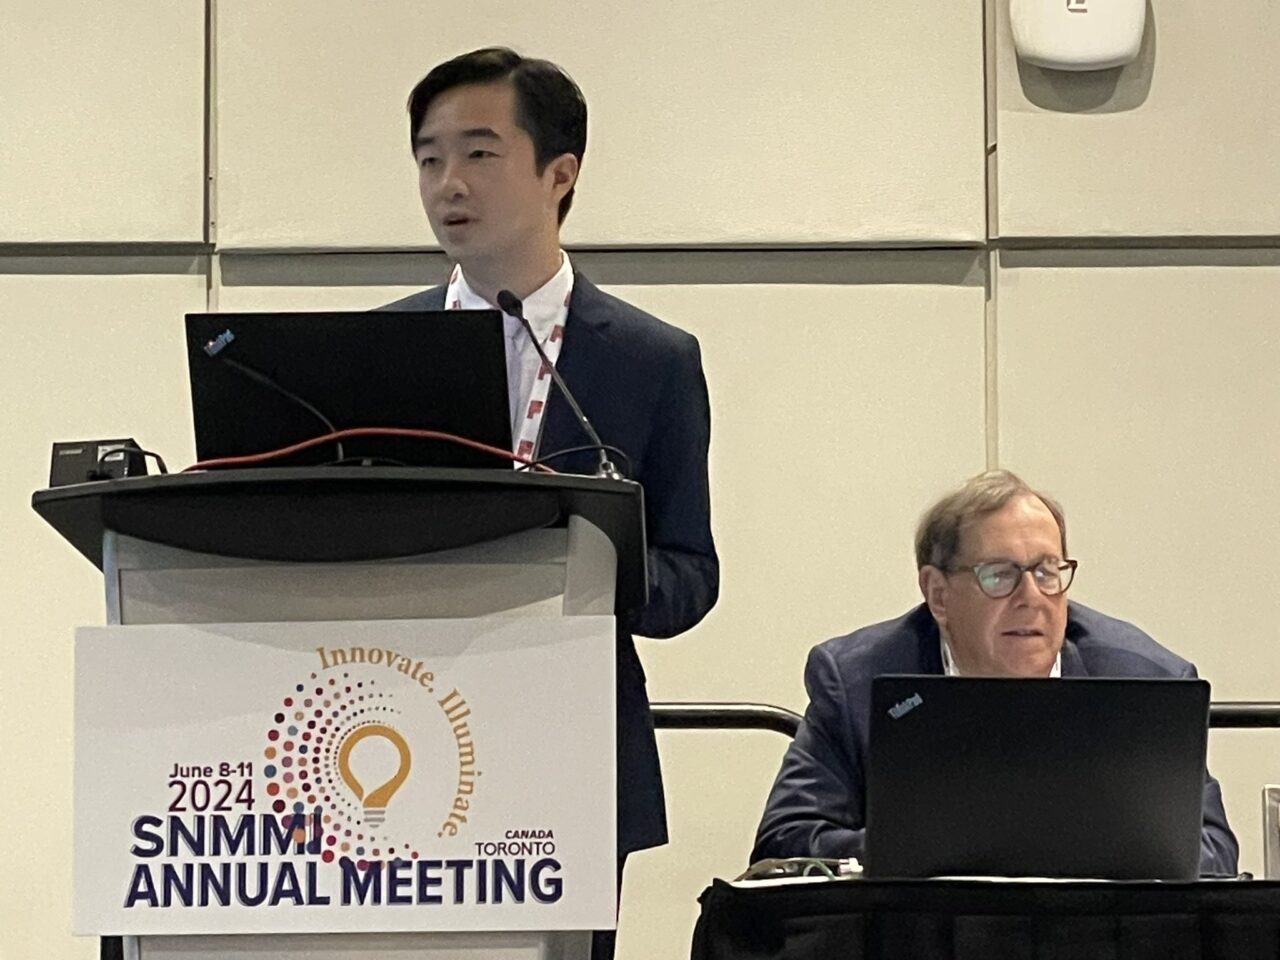 Kerry Jewell: Excellent presentation by David C. Chen at SNMMI24